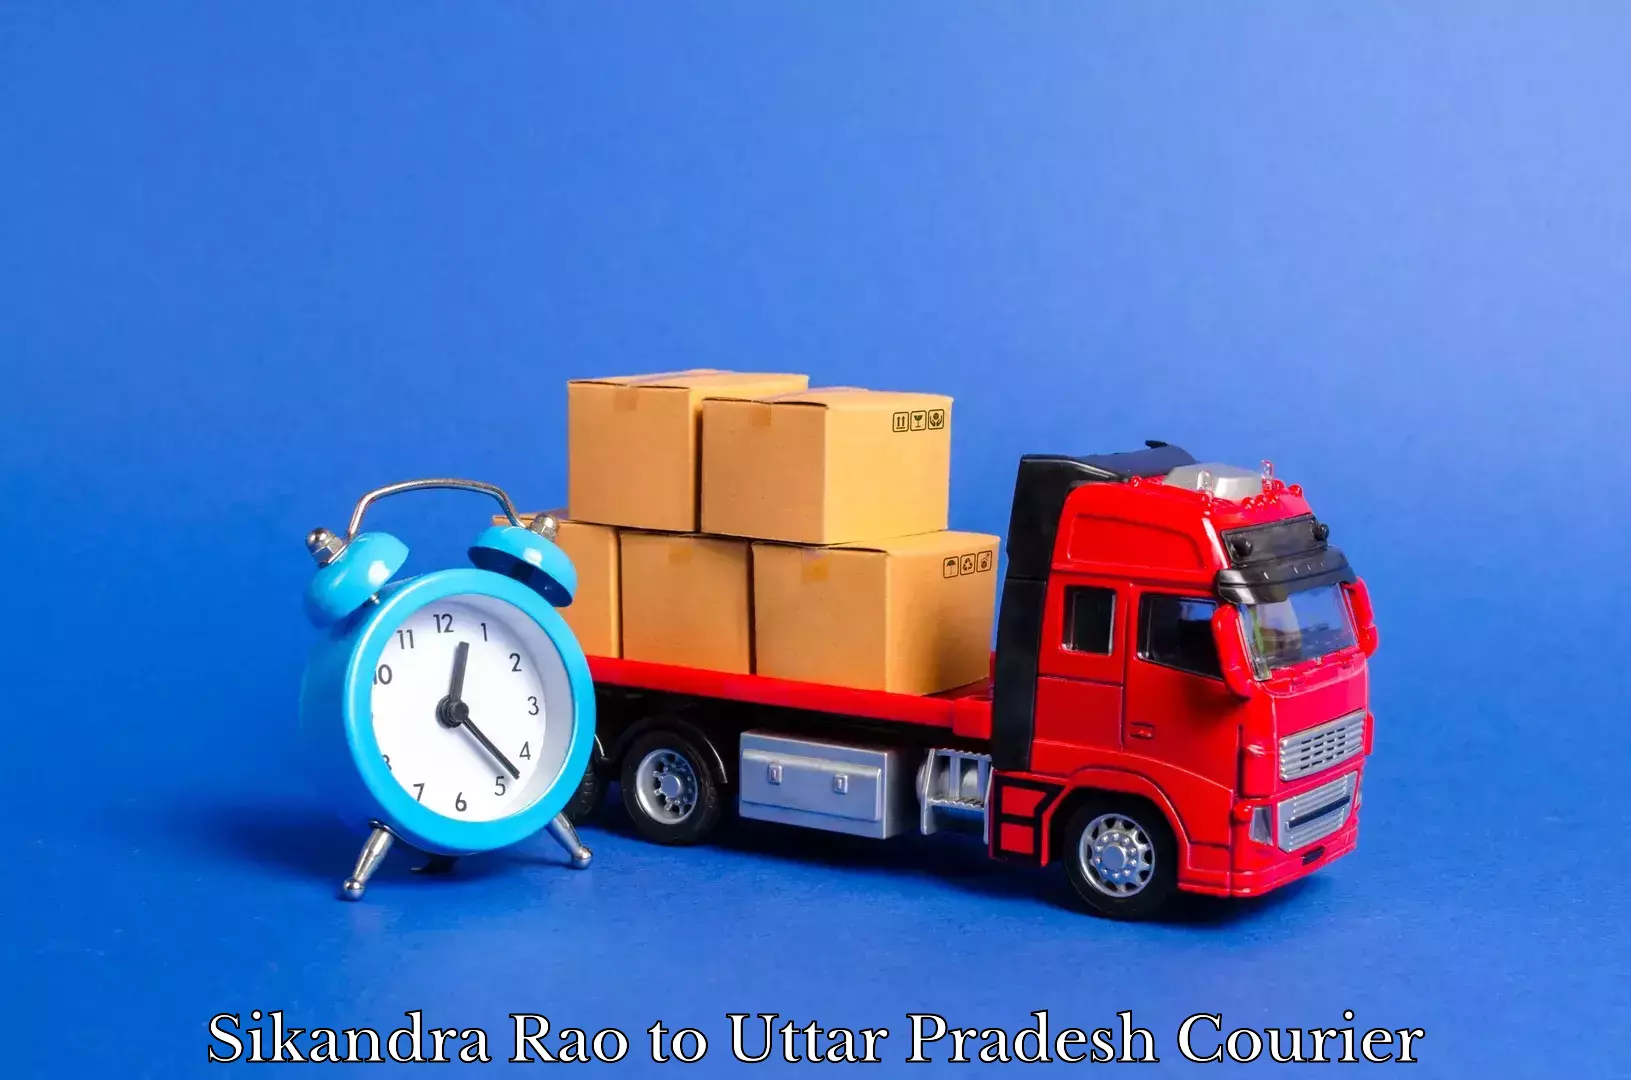 Trusted furniture transport in Sikandra Rao to Ayodhya